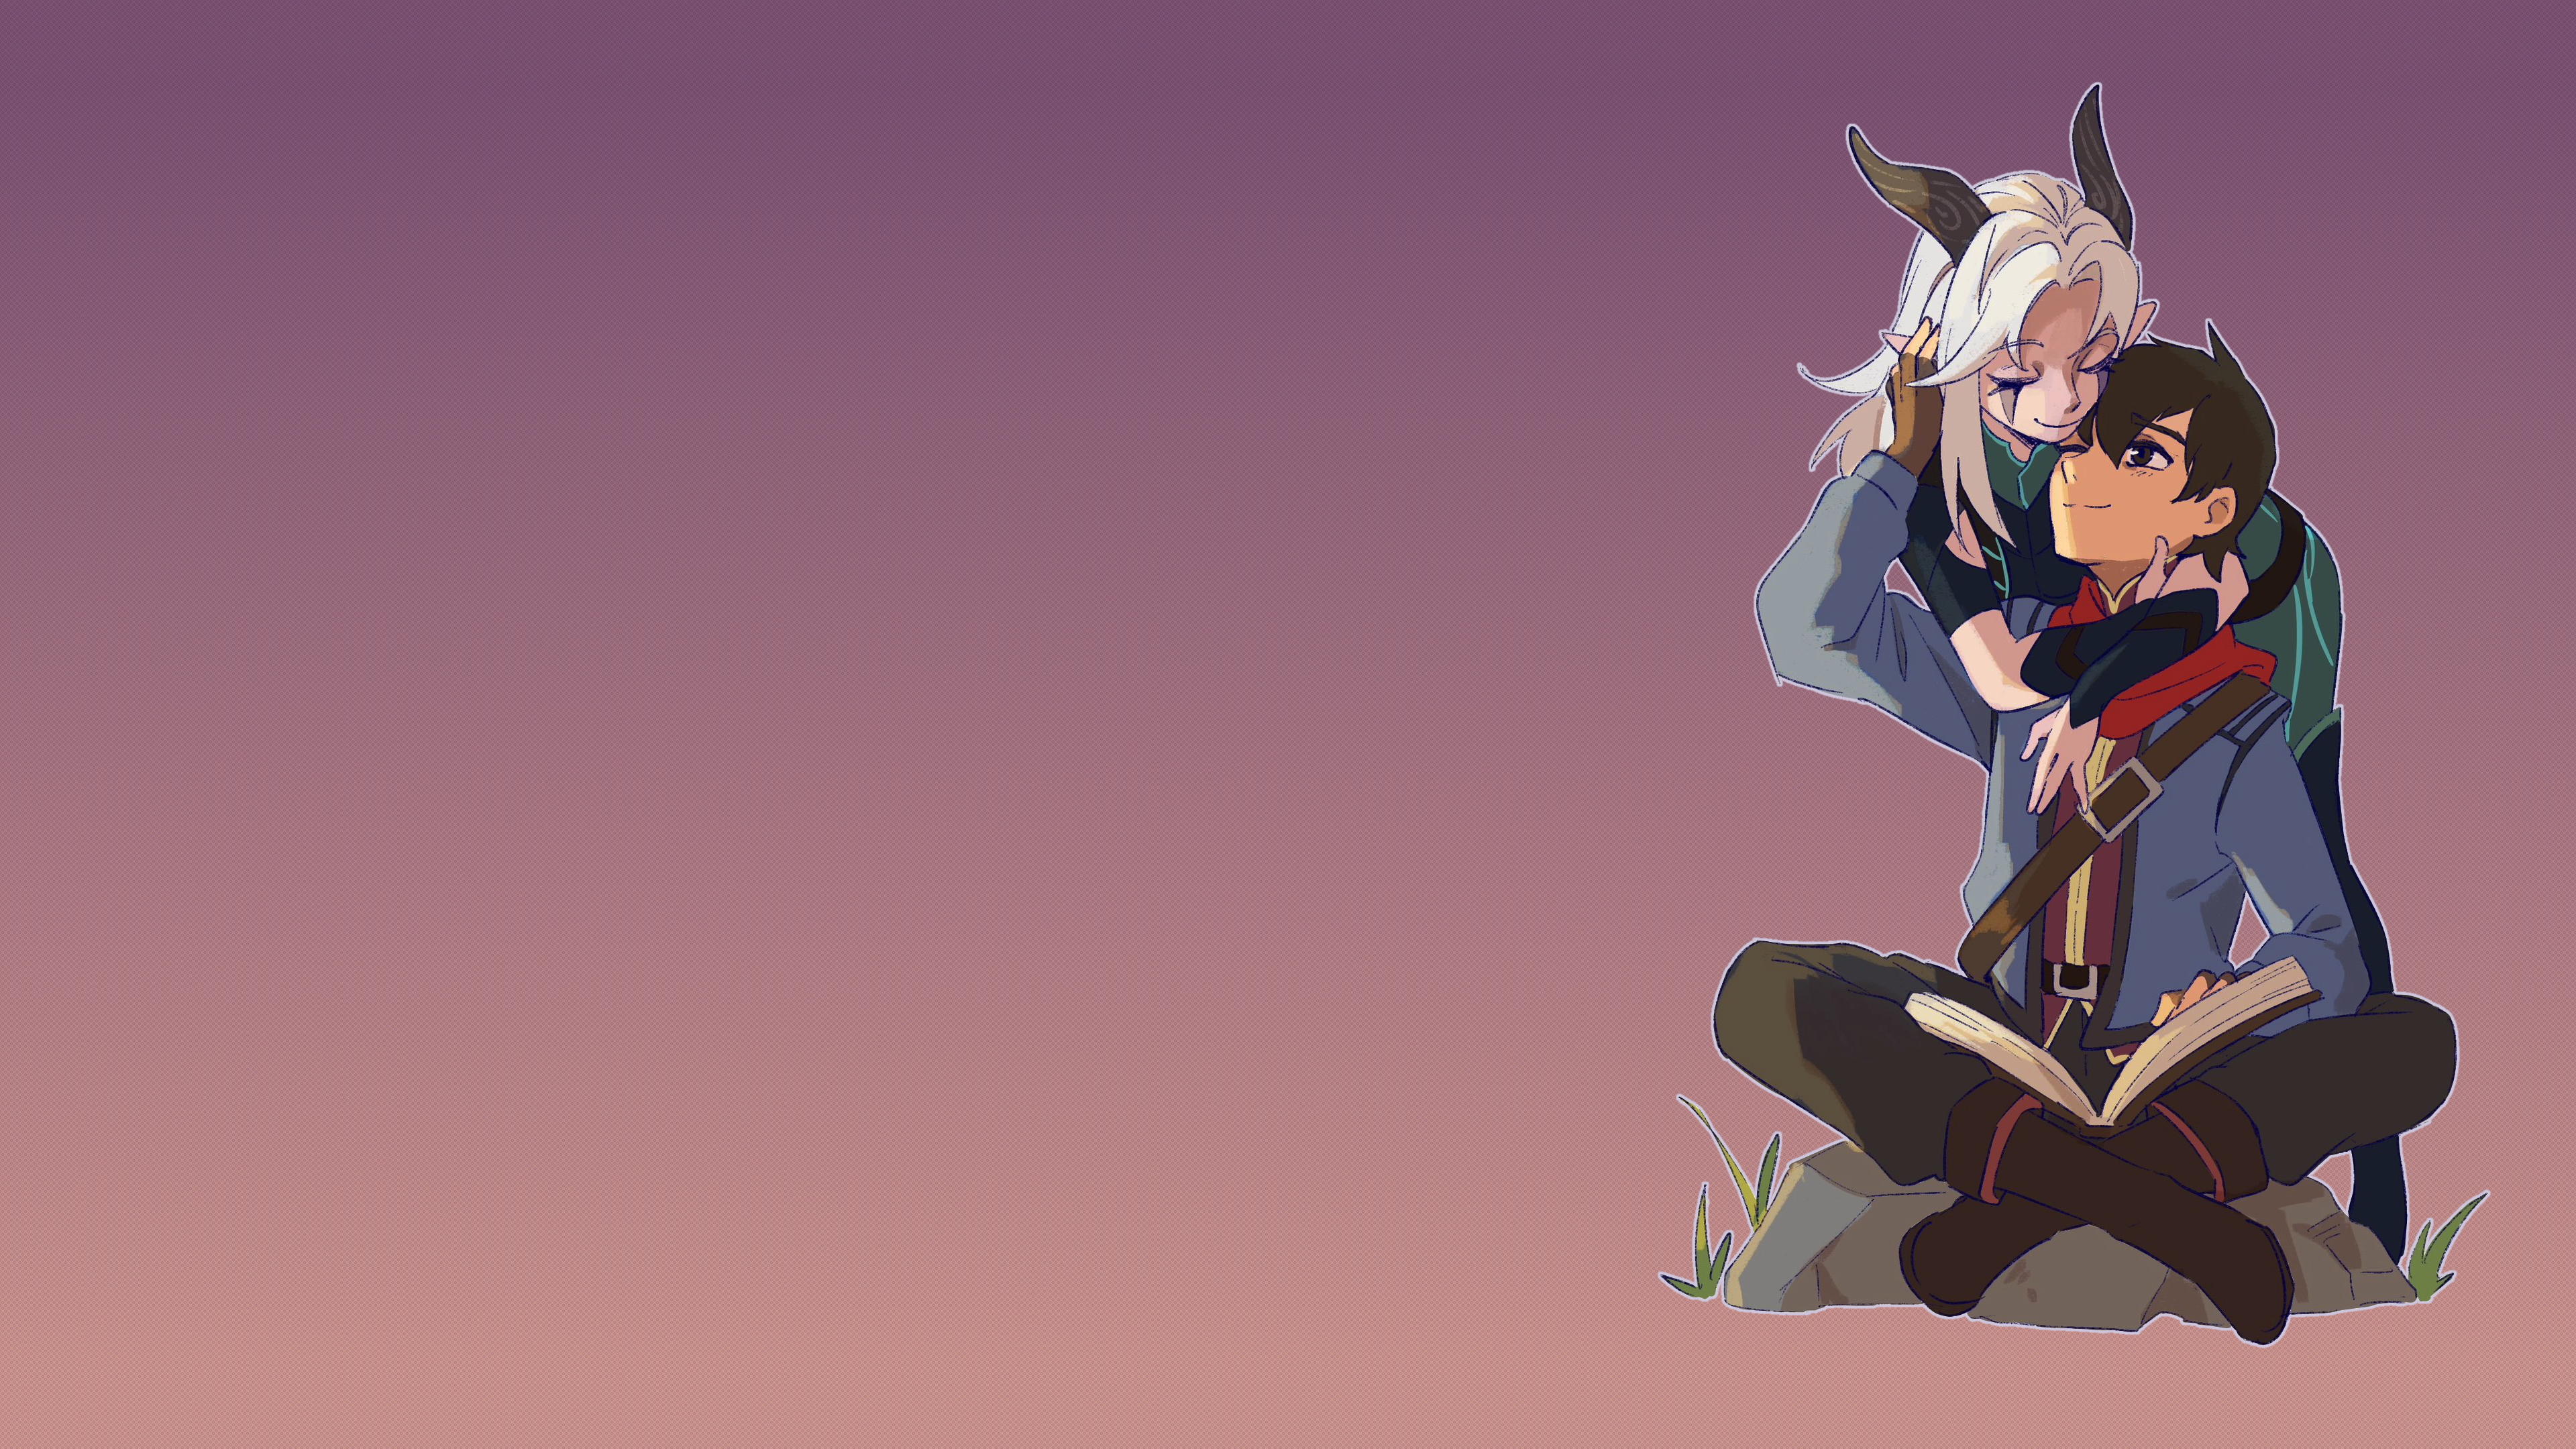 Anime 3840x2160 The Dragon Prince Callum Rayla  gradient simple background purple background horns elves elven purple skin white hair tight clothing boots leather boots jacket blue jacket scarf red scarfs gloves armlet bracelets hugging couple closed eyes brown eyes brunette long hair bangs short hair backpacks fingerless gloves pointy ears